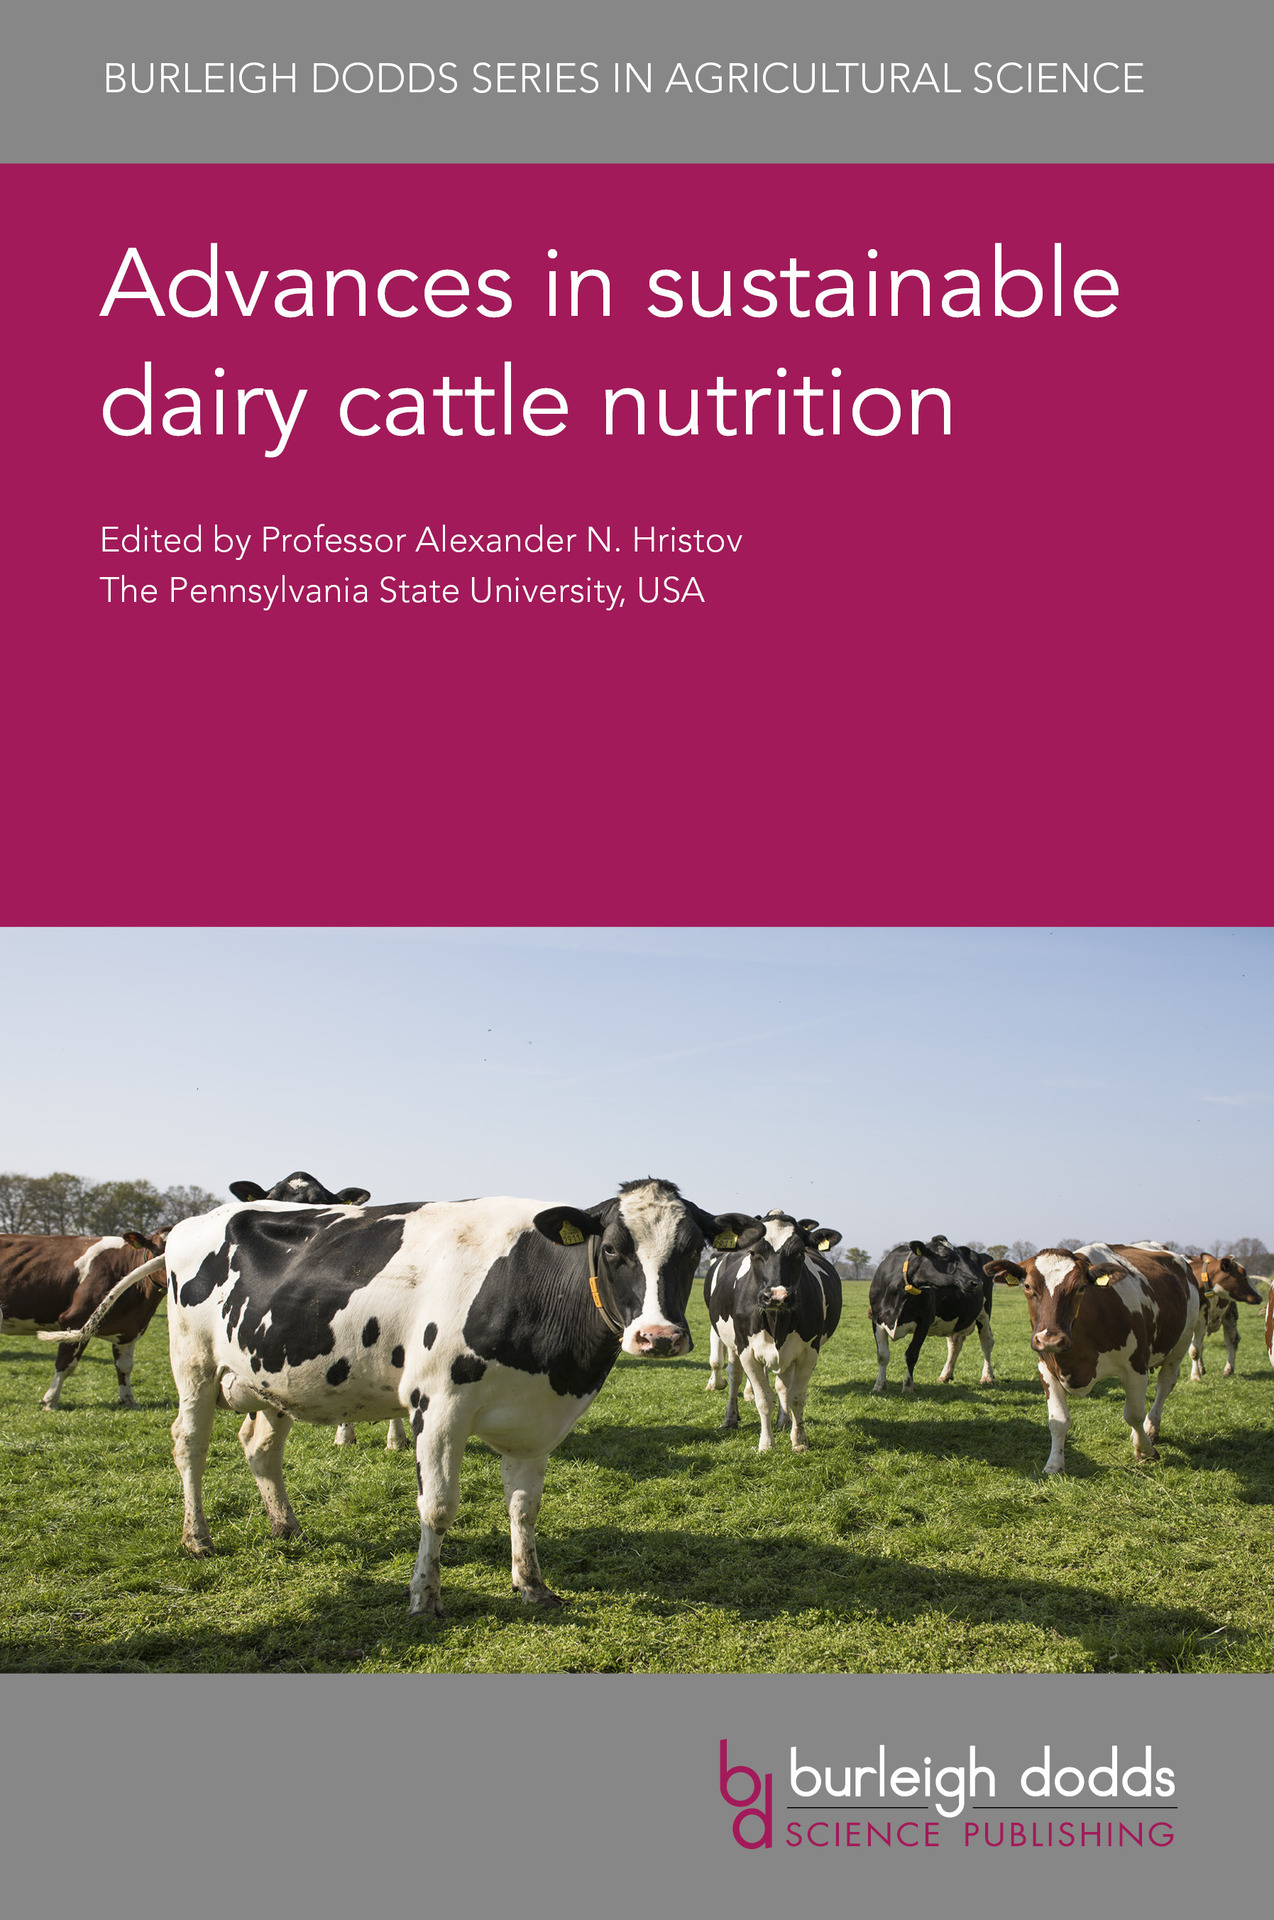 Advances in sustainable dairy cattle nutrition - Cover image